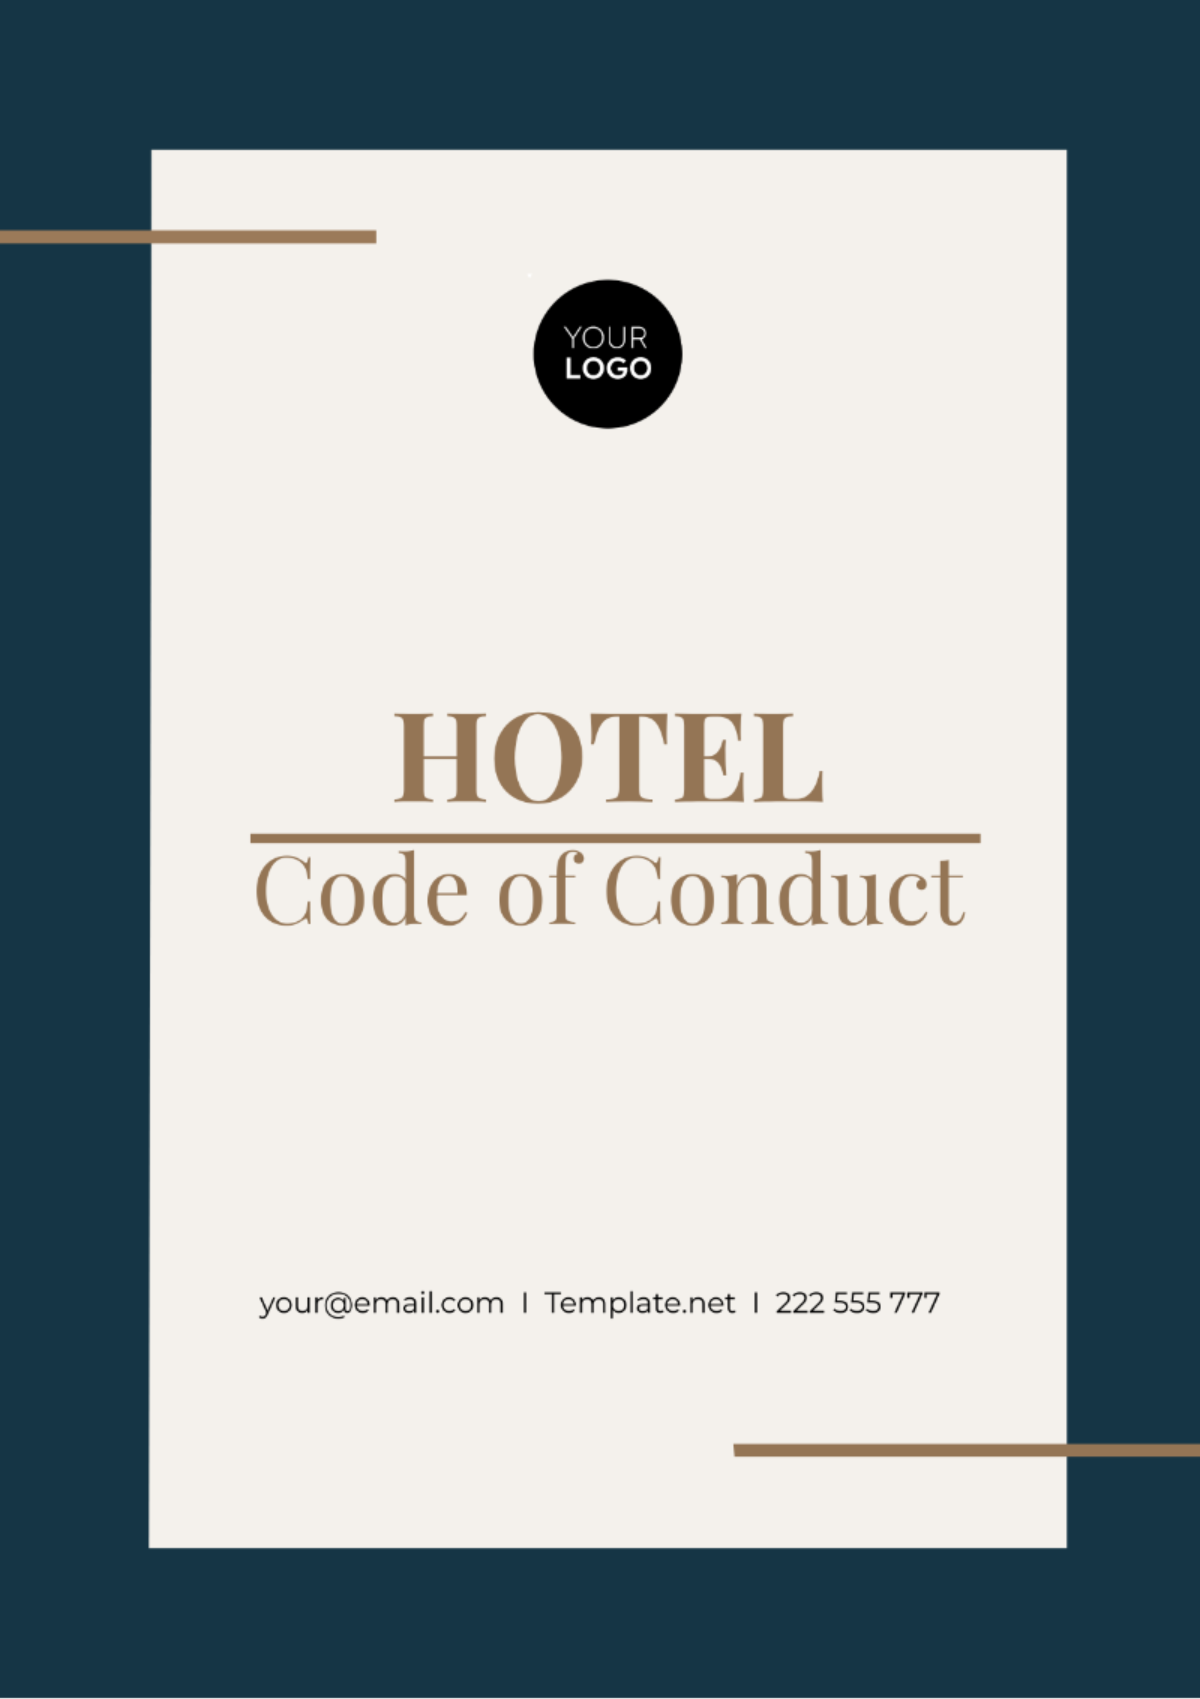 Hotel Code of Conduct Template